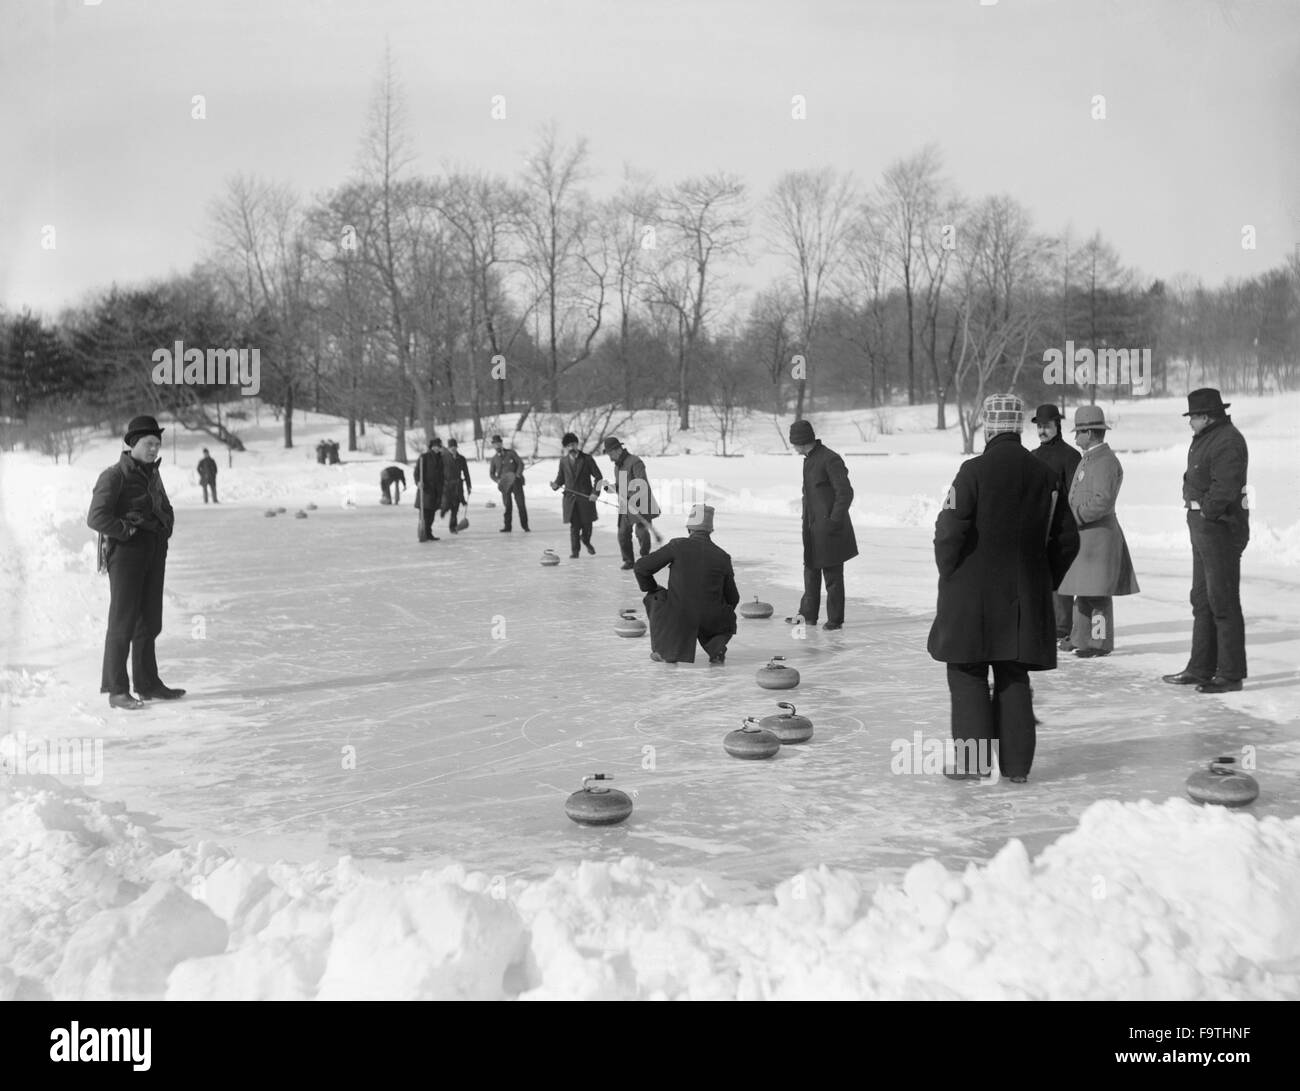 Group of Men Curling, Central Park, New York City, USA, circa 1900 Stock Photo